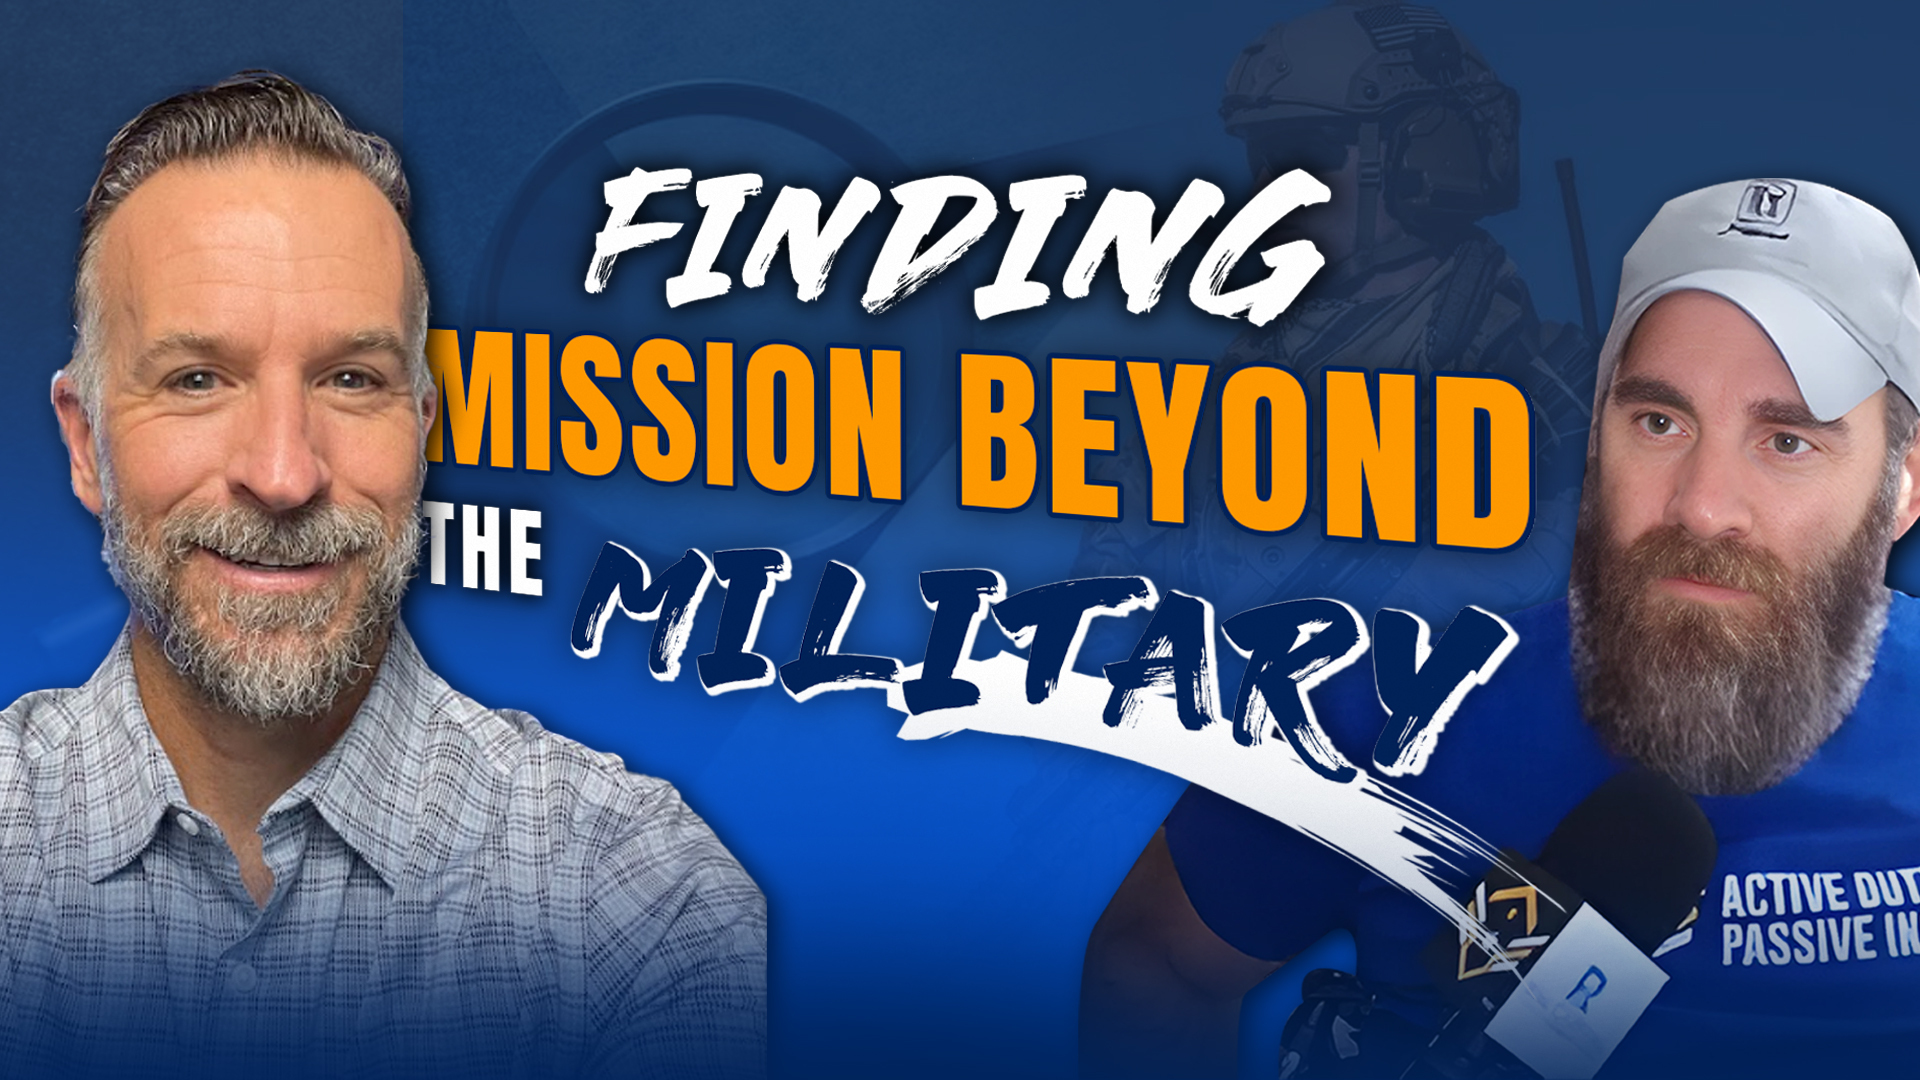 Flow Over Fear: Finding Mission Beyond the Military